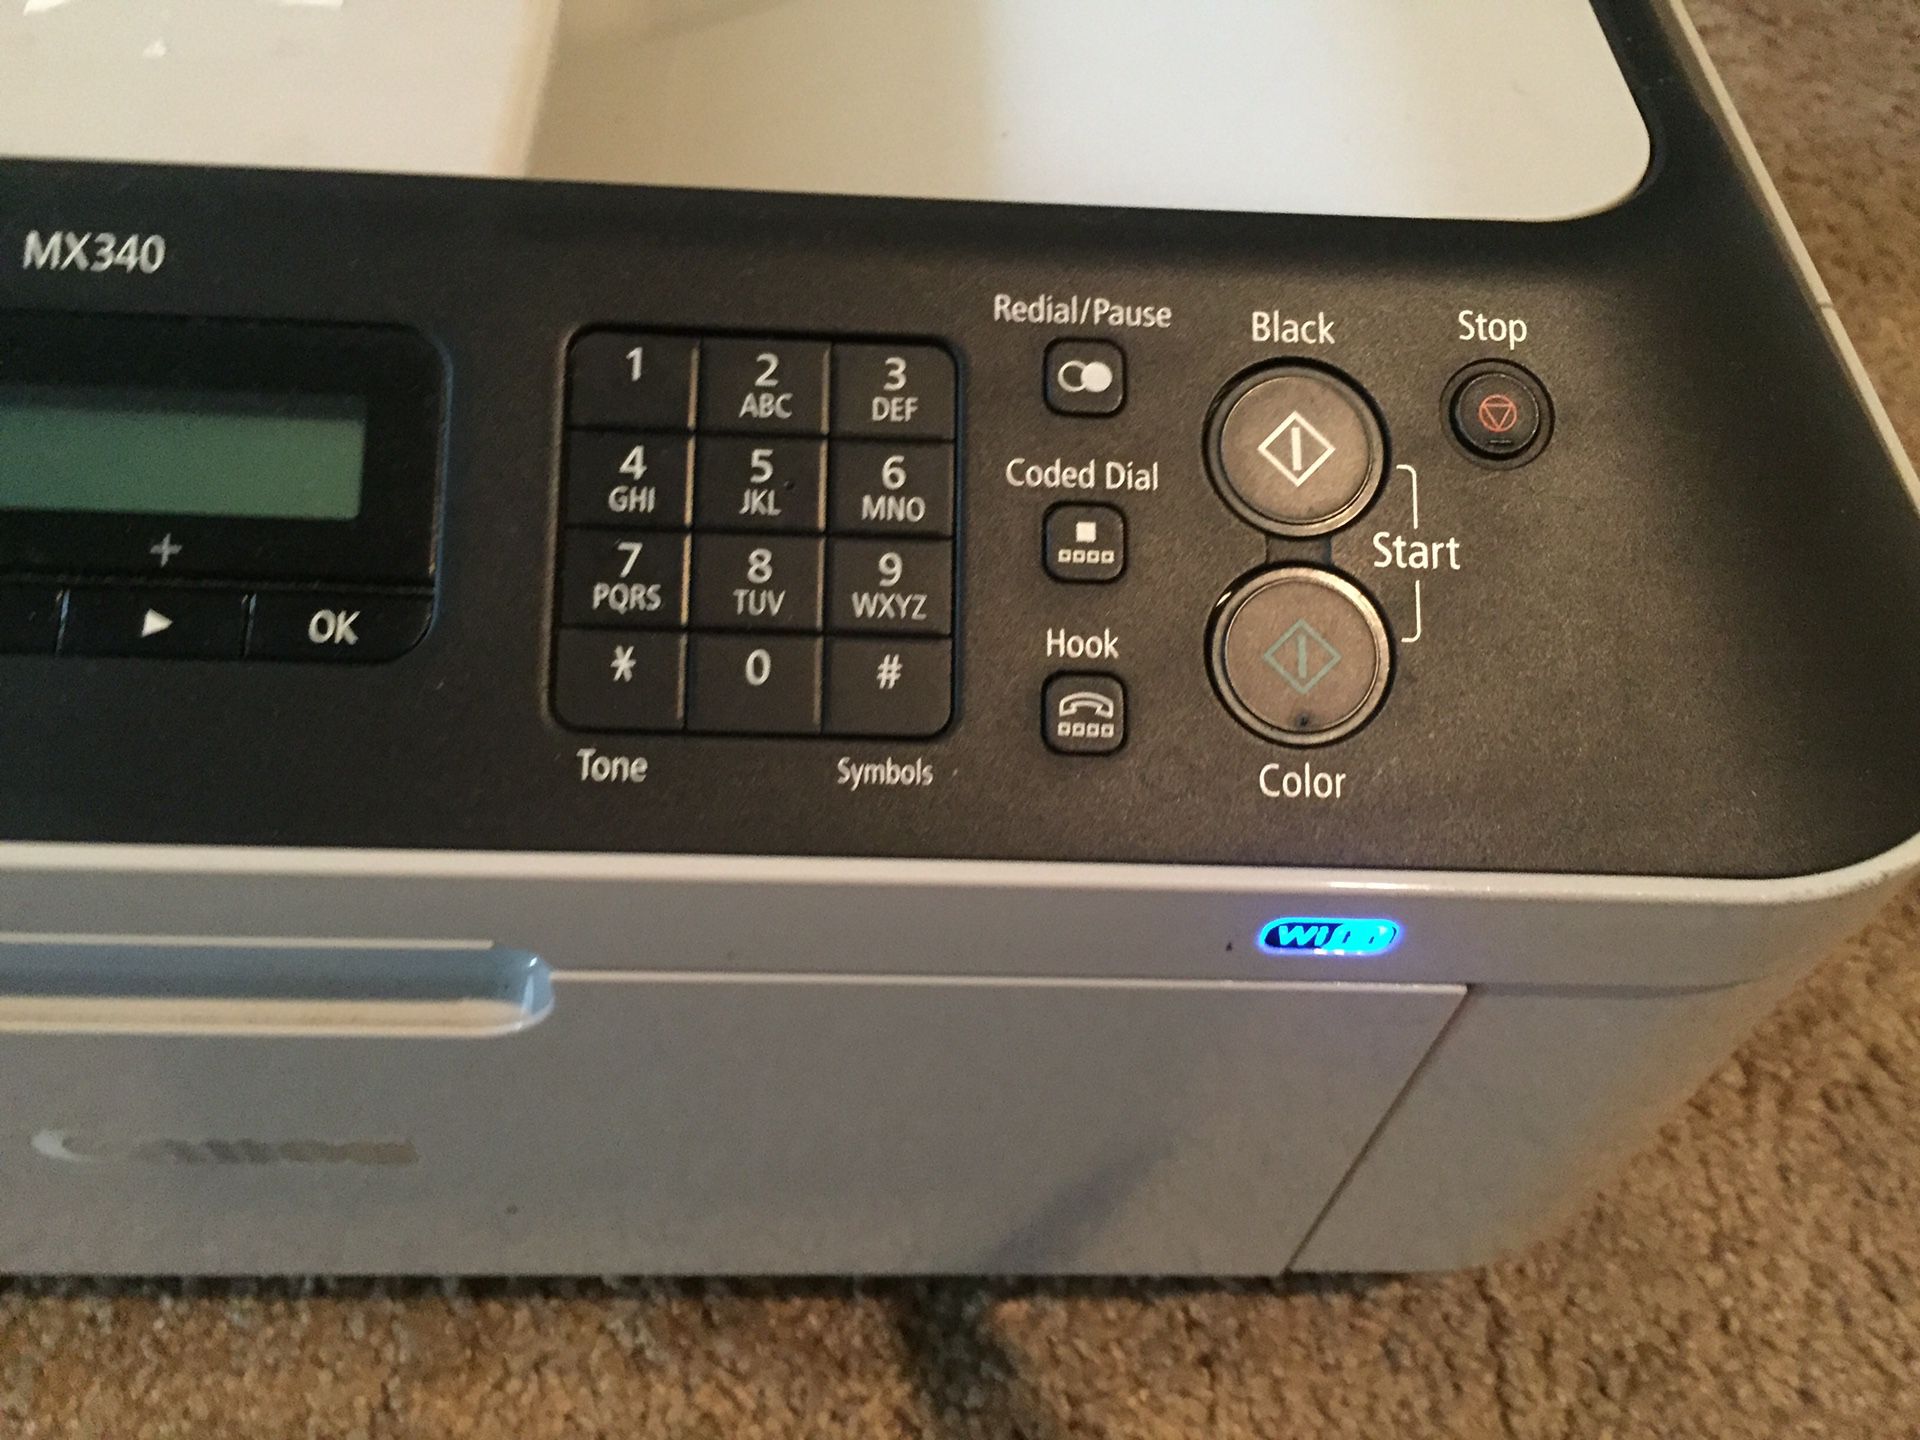 Canon Pixma mx340 , all in one inkjet printer copy,scan,fax it’s wireless with INK